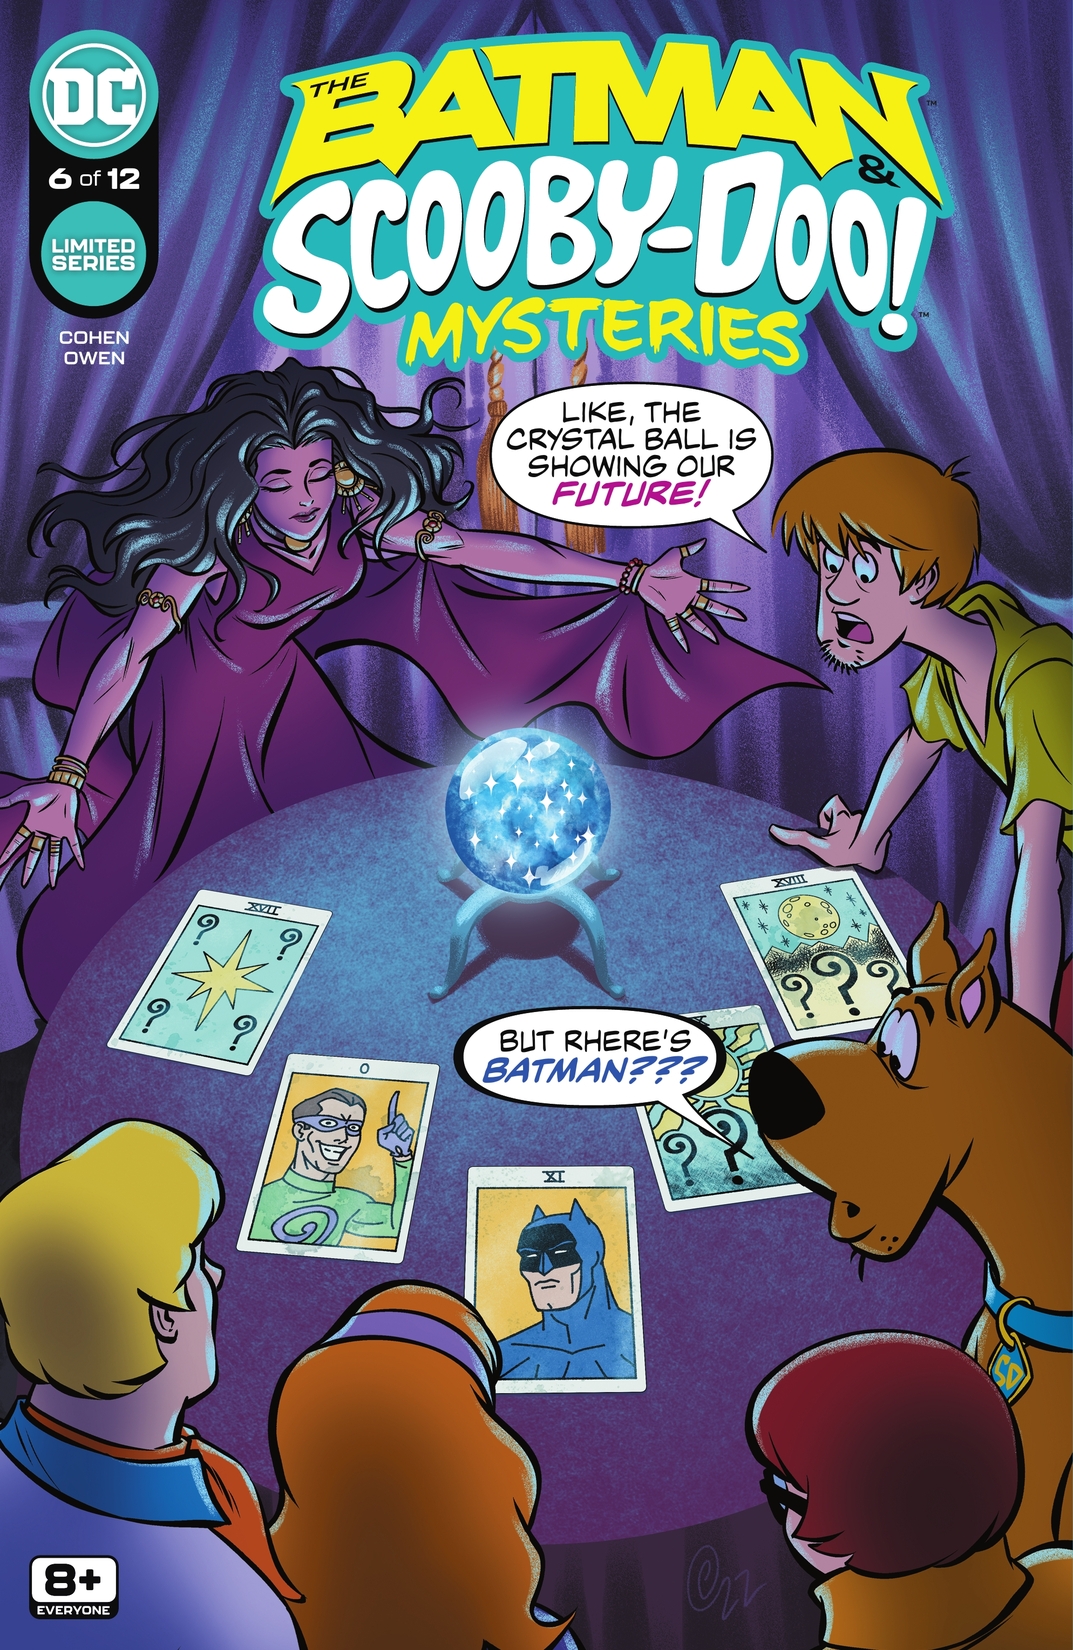 The Batman & Scooby-Doo Mysteries #6 preview images